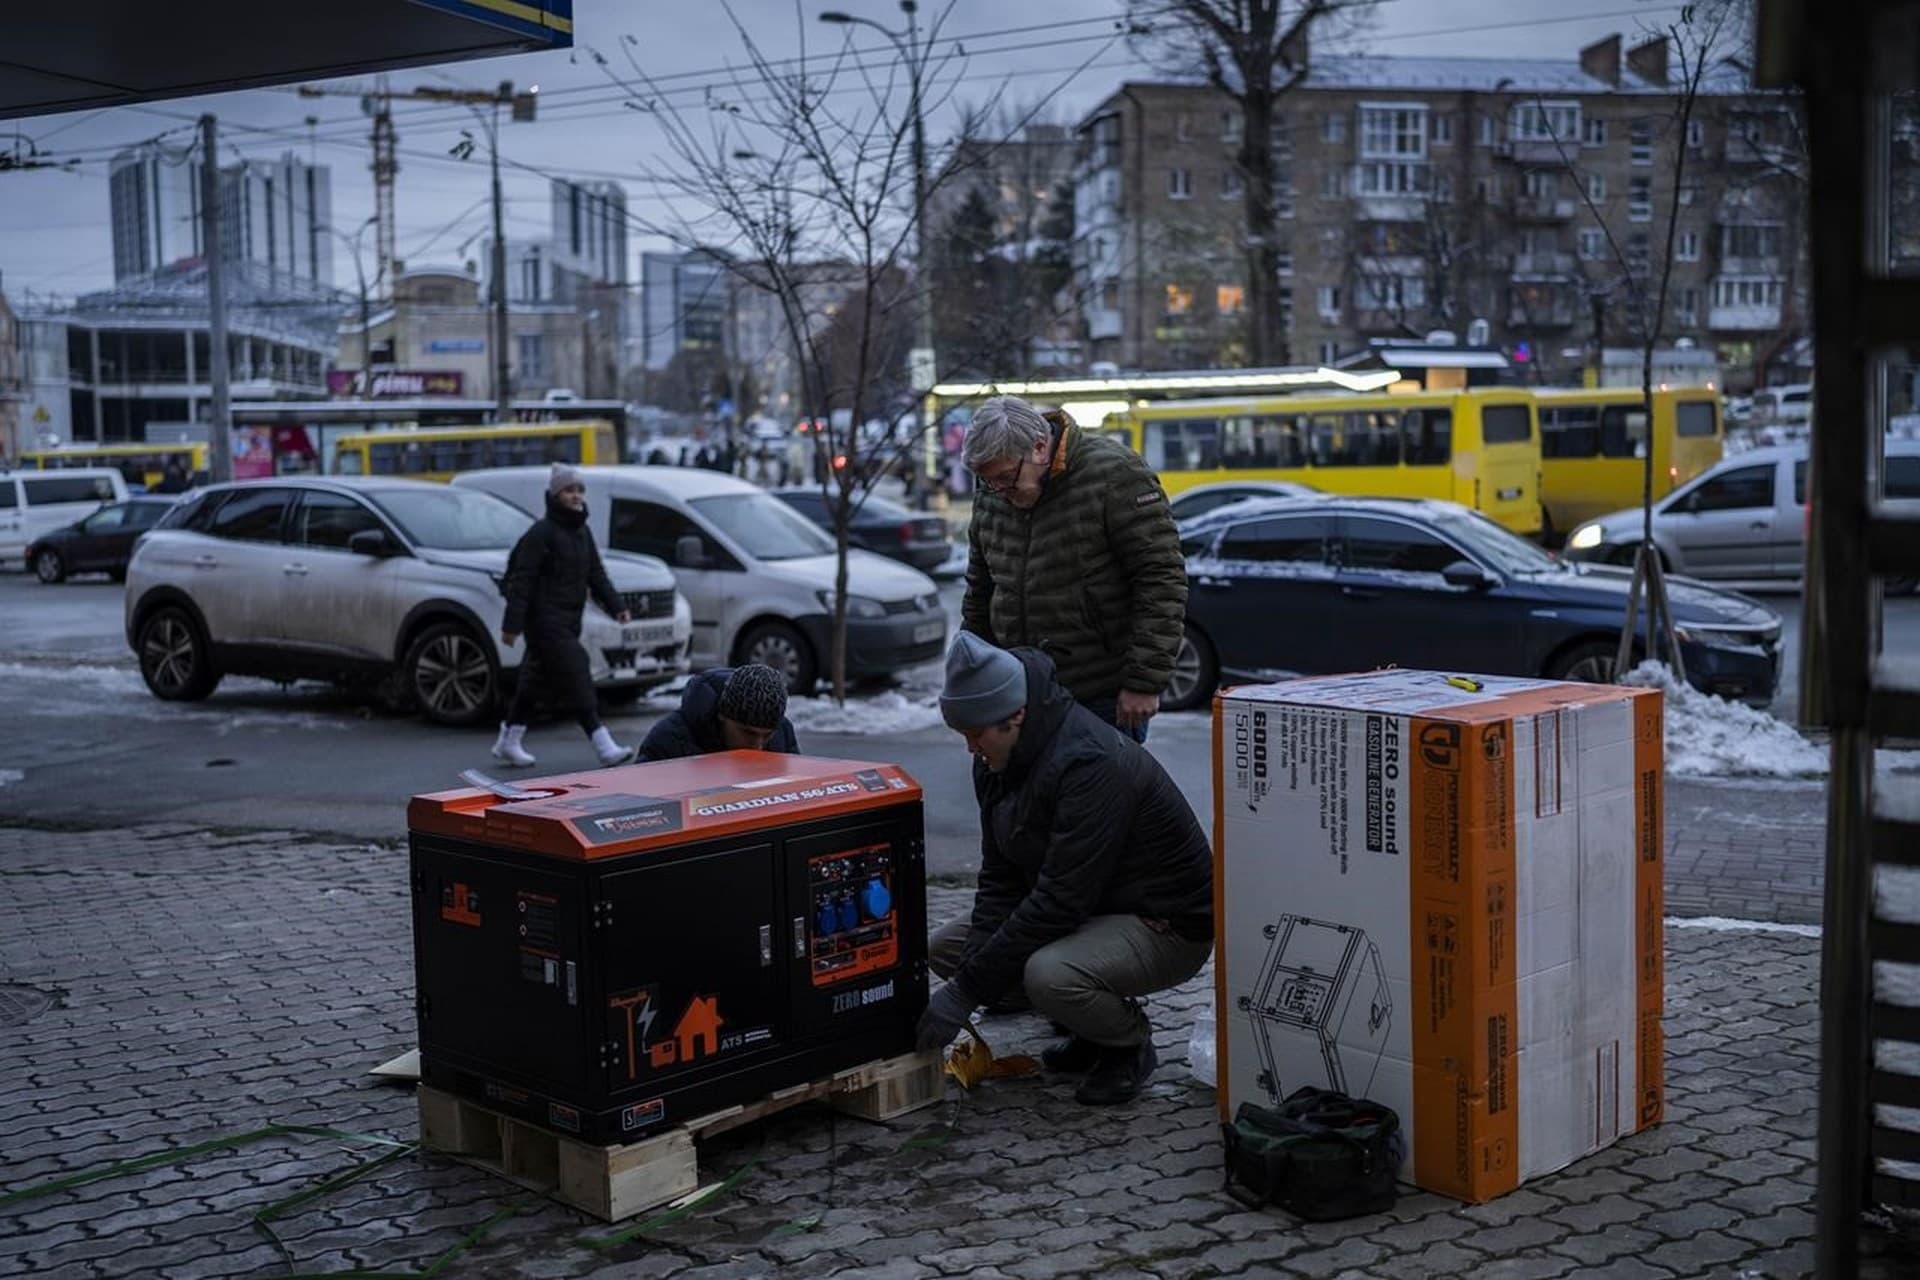 Ukrainians unpack a power generator before installing it at a bank branch in Kyiv